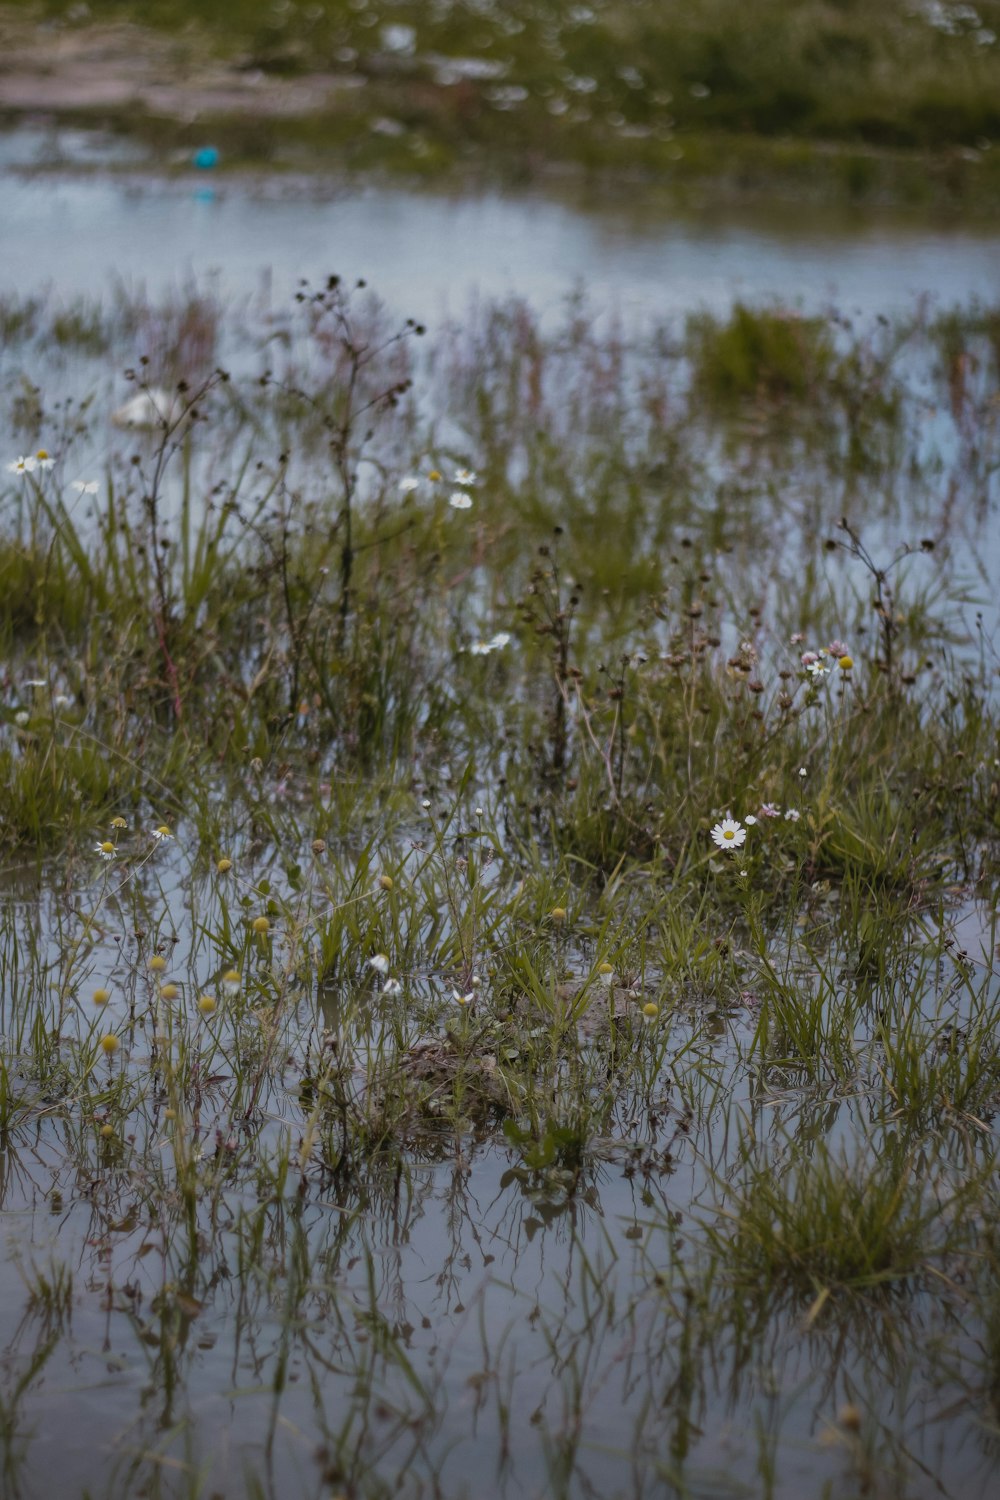 a bird standing in the middle of a flooded field